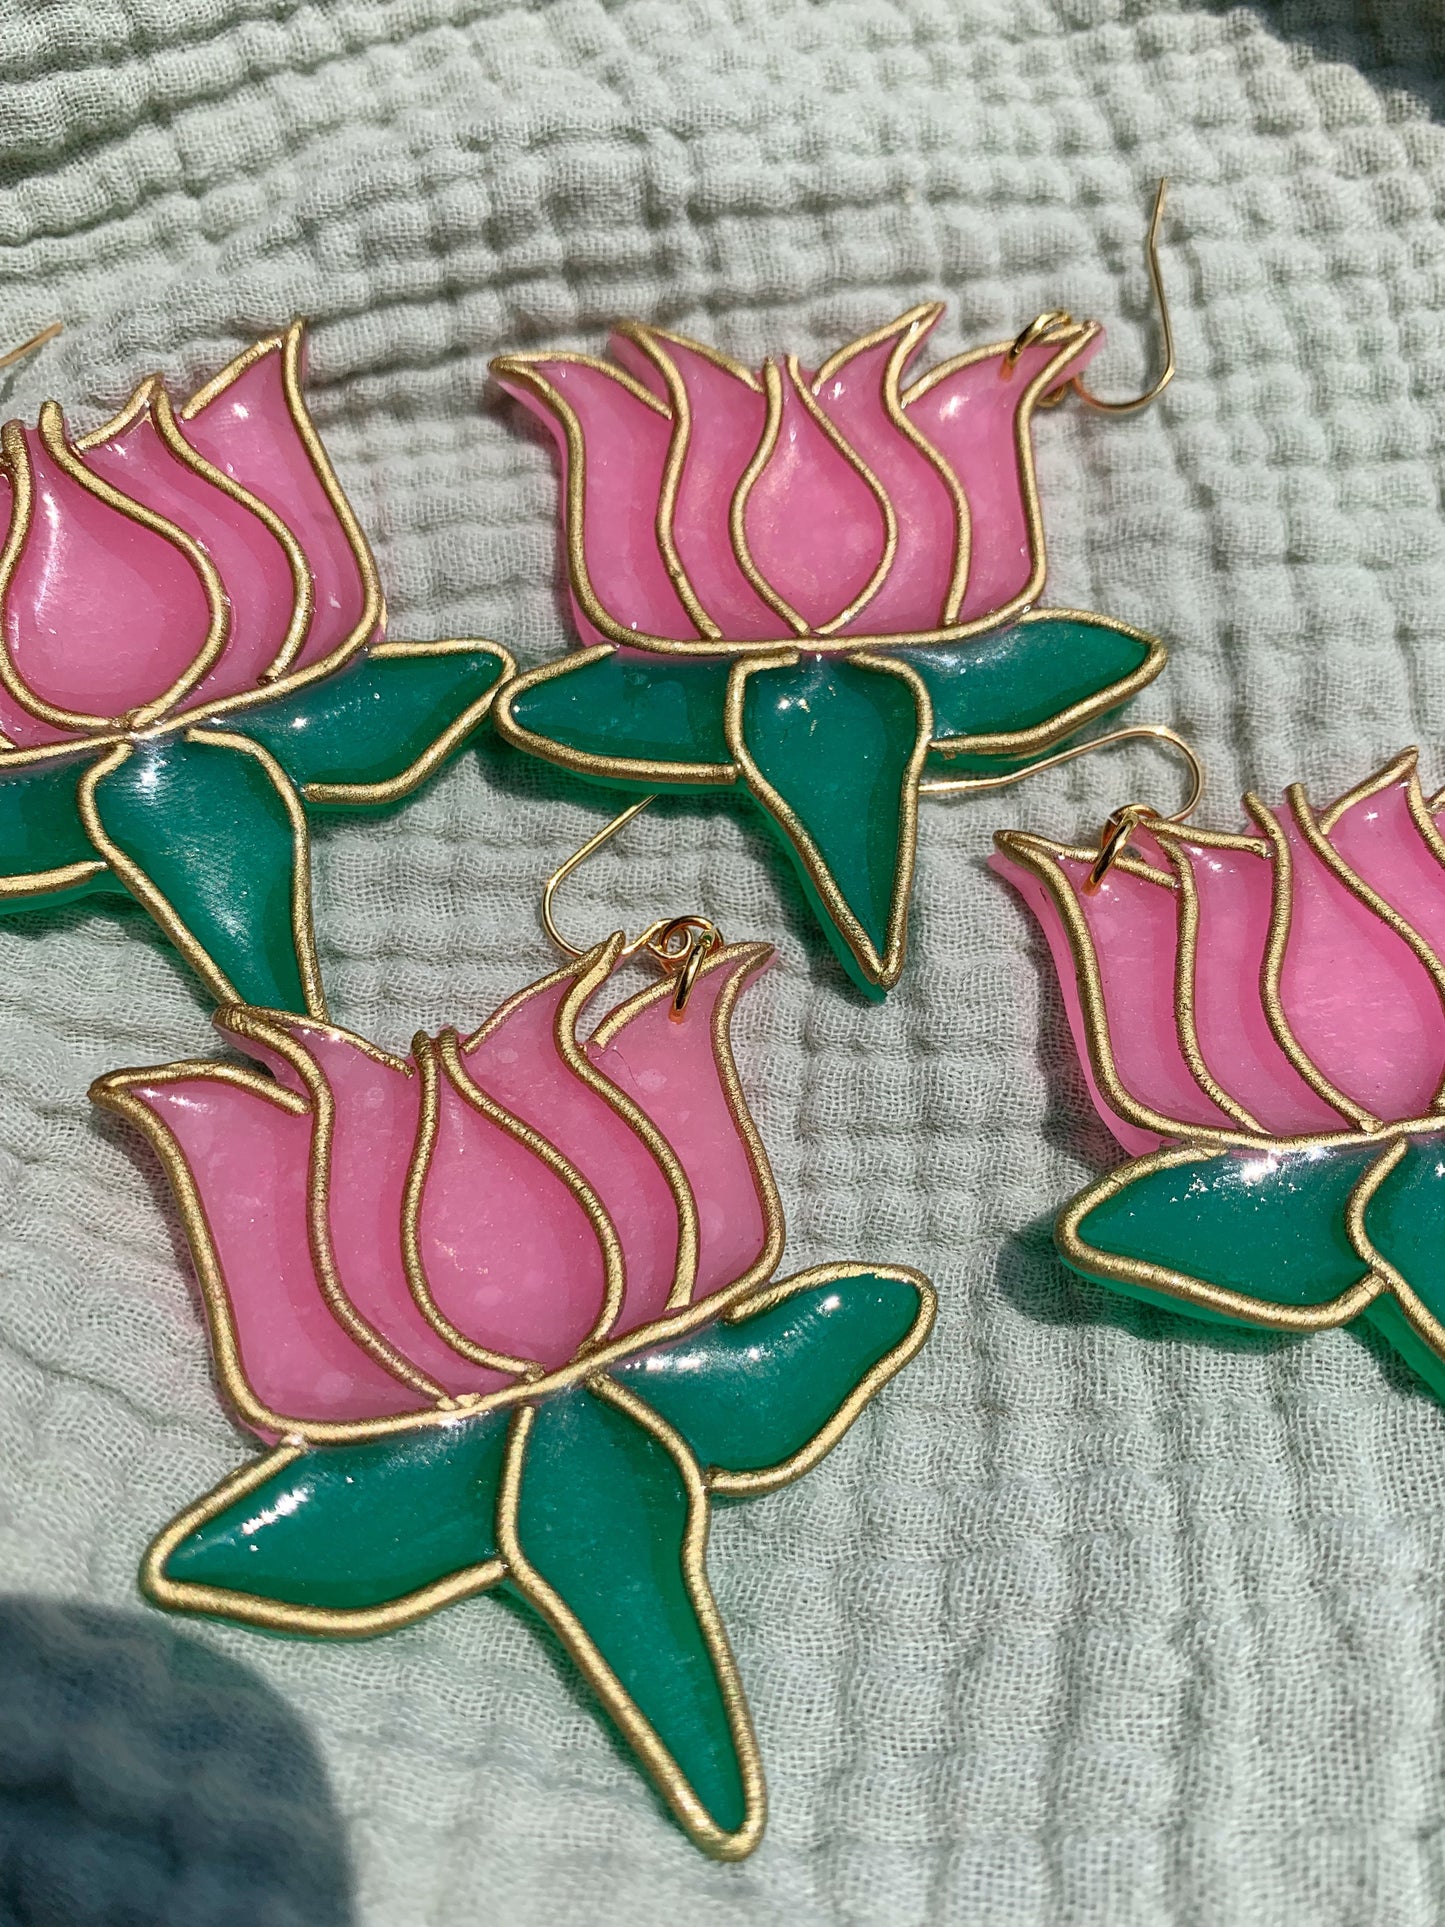 Stained Glass Lotus Flower Earrings